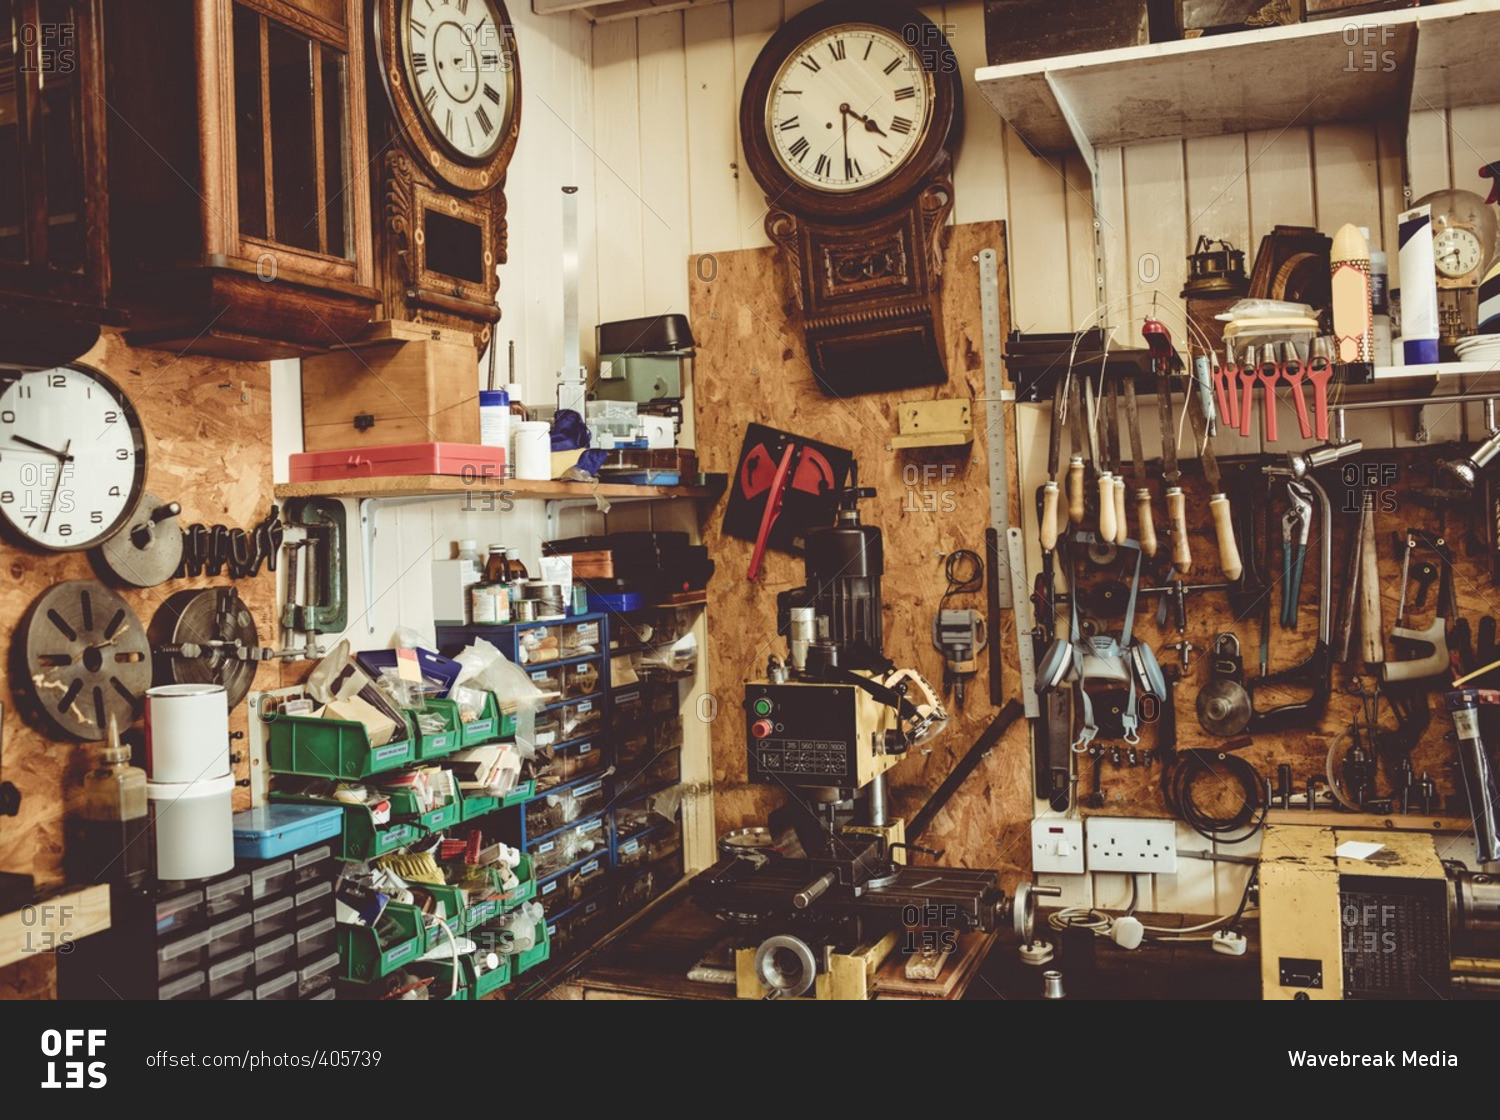 Old horologists workshop with clock repairing tools, equipment and clocks on the wall